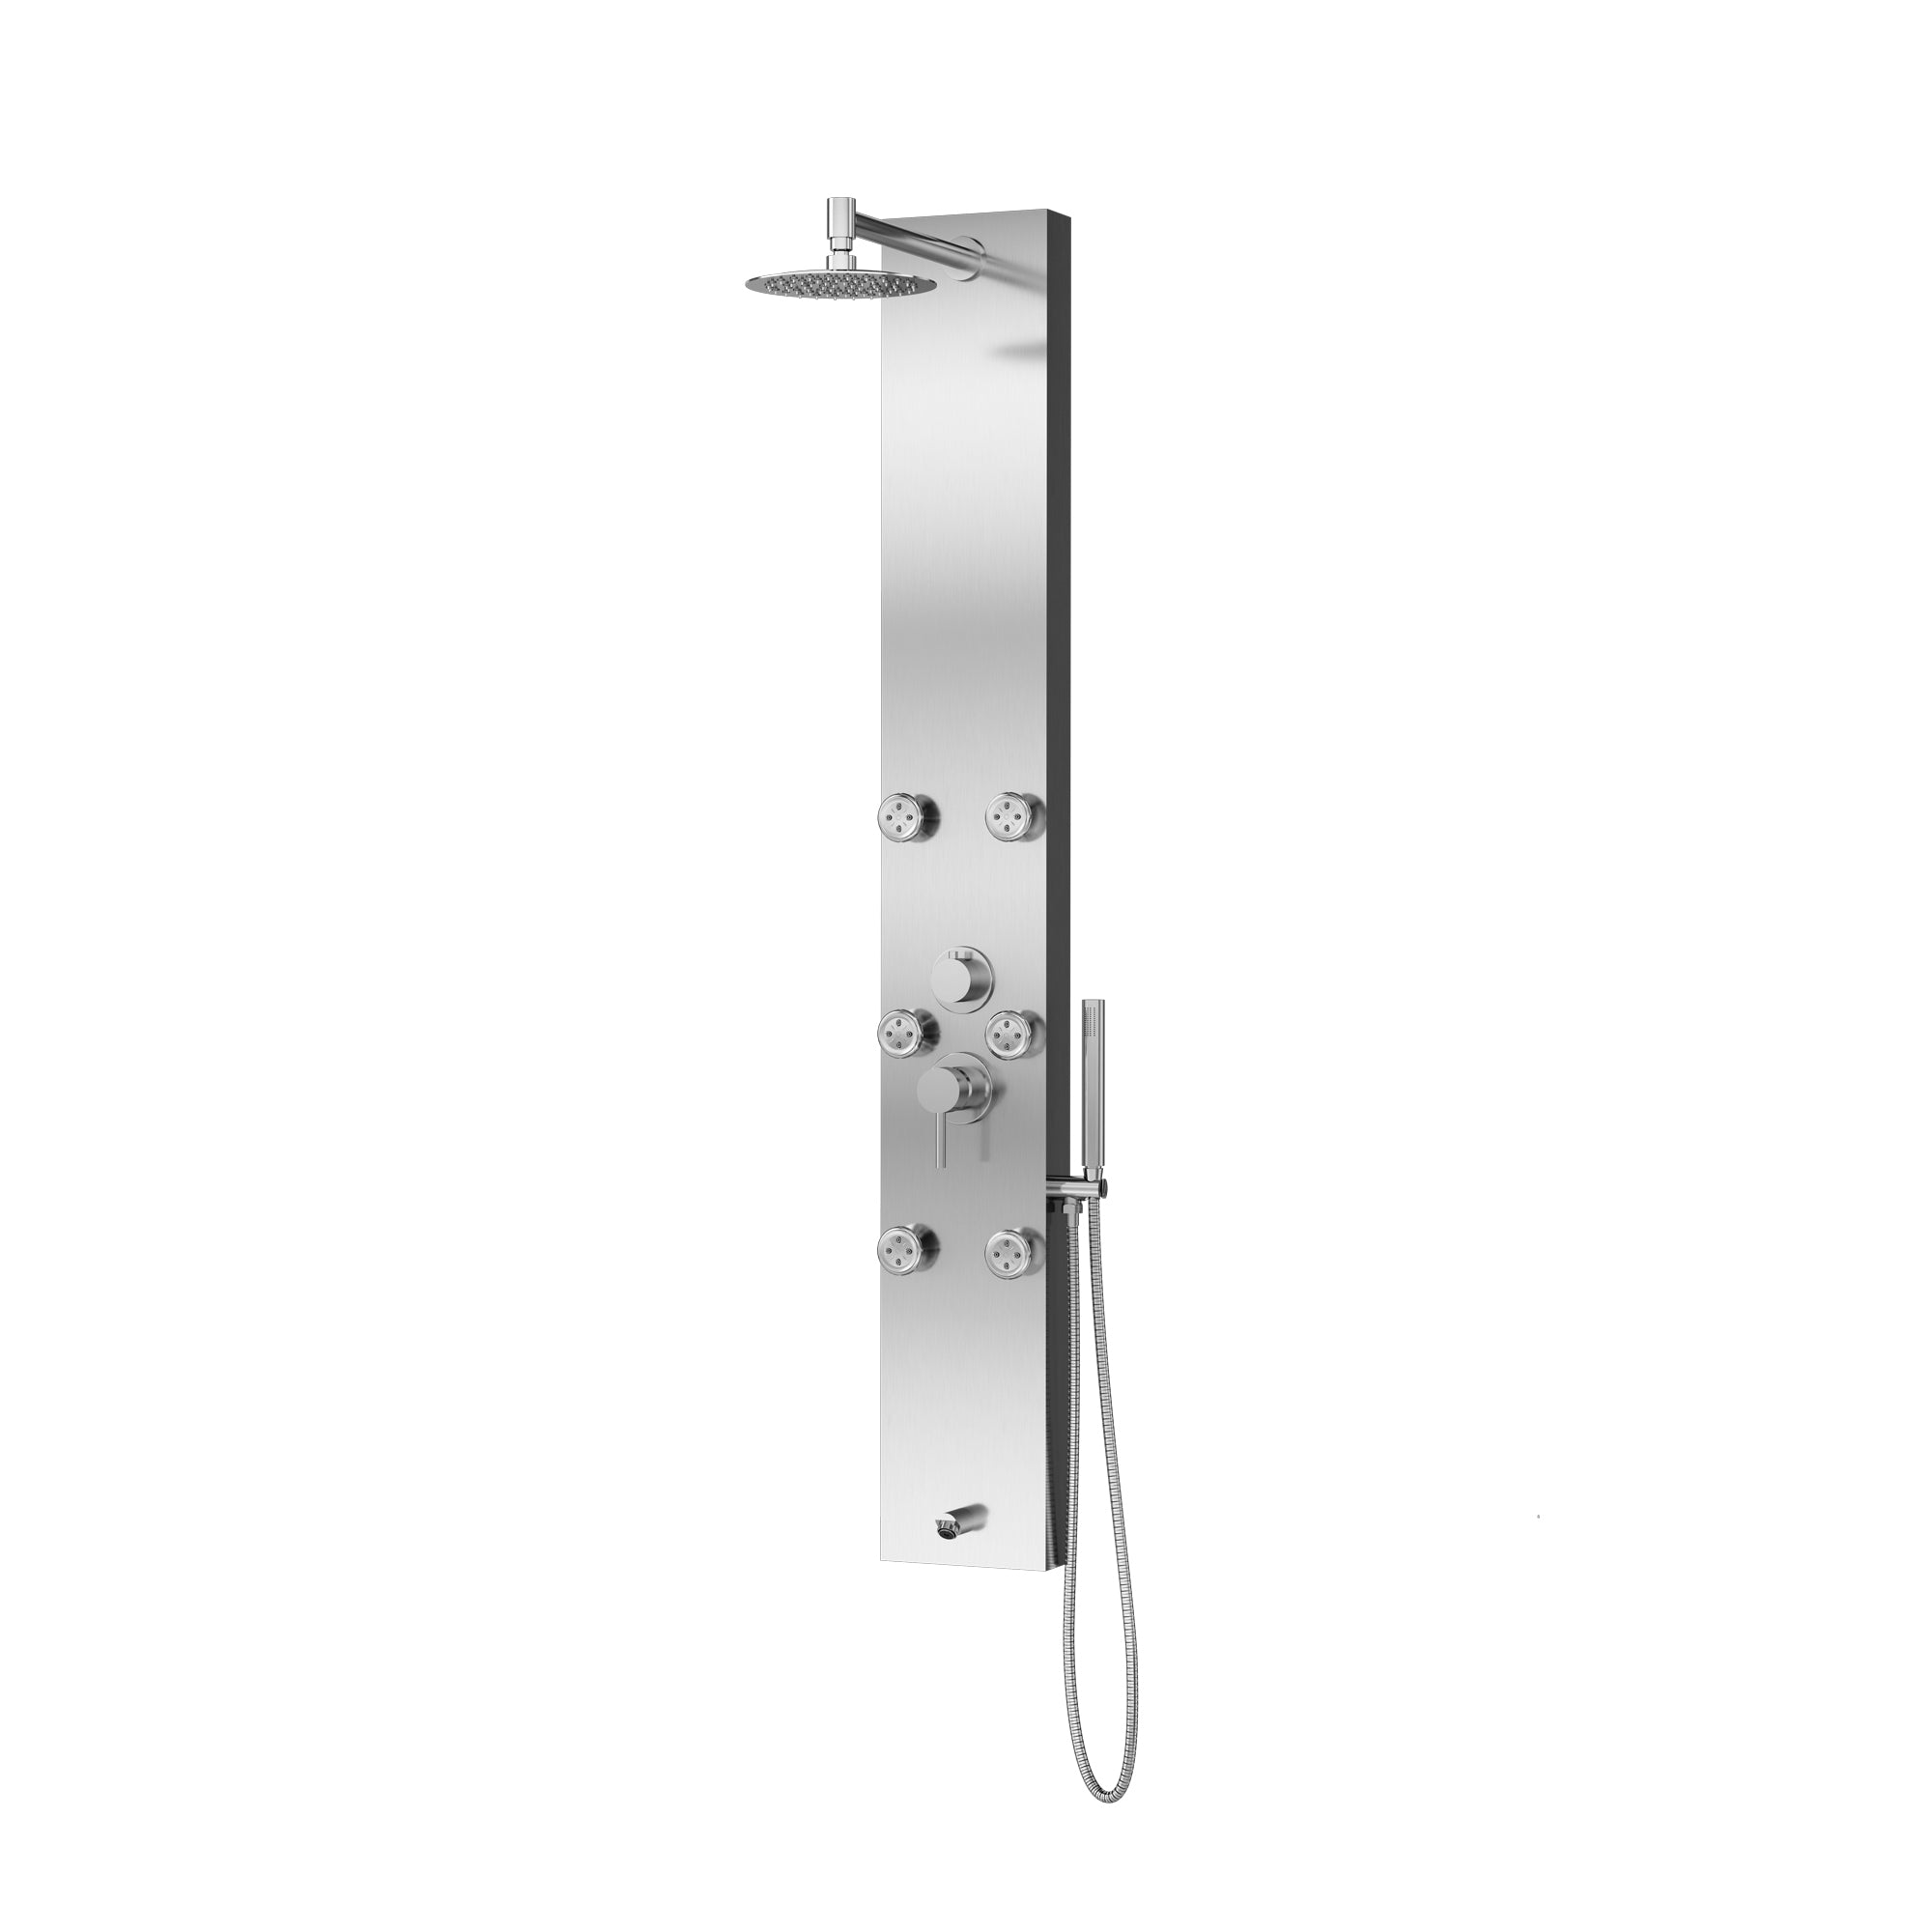 PULSE ShowerSpas Stainless Steel Shower Panel - Monterey ShowerSpa - with 8 in. Low profile stainless steel rain shower head with soft tips, Single-function hand shower with double-interlocking stainless steel hose, 6-Single-function Silk Spray Jets and Brass tub spout/temperature tester - Brushed Nickel - 1042 - Vital Hydrotherapy